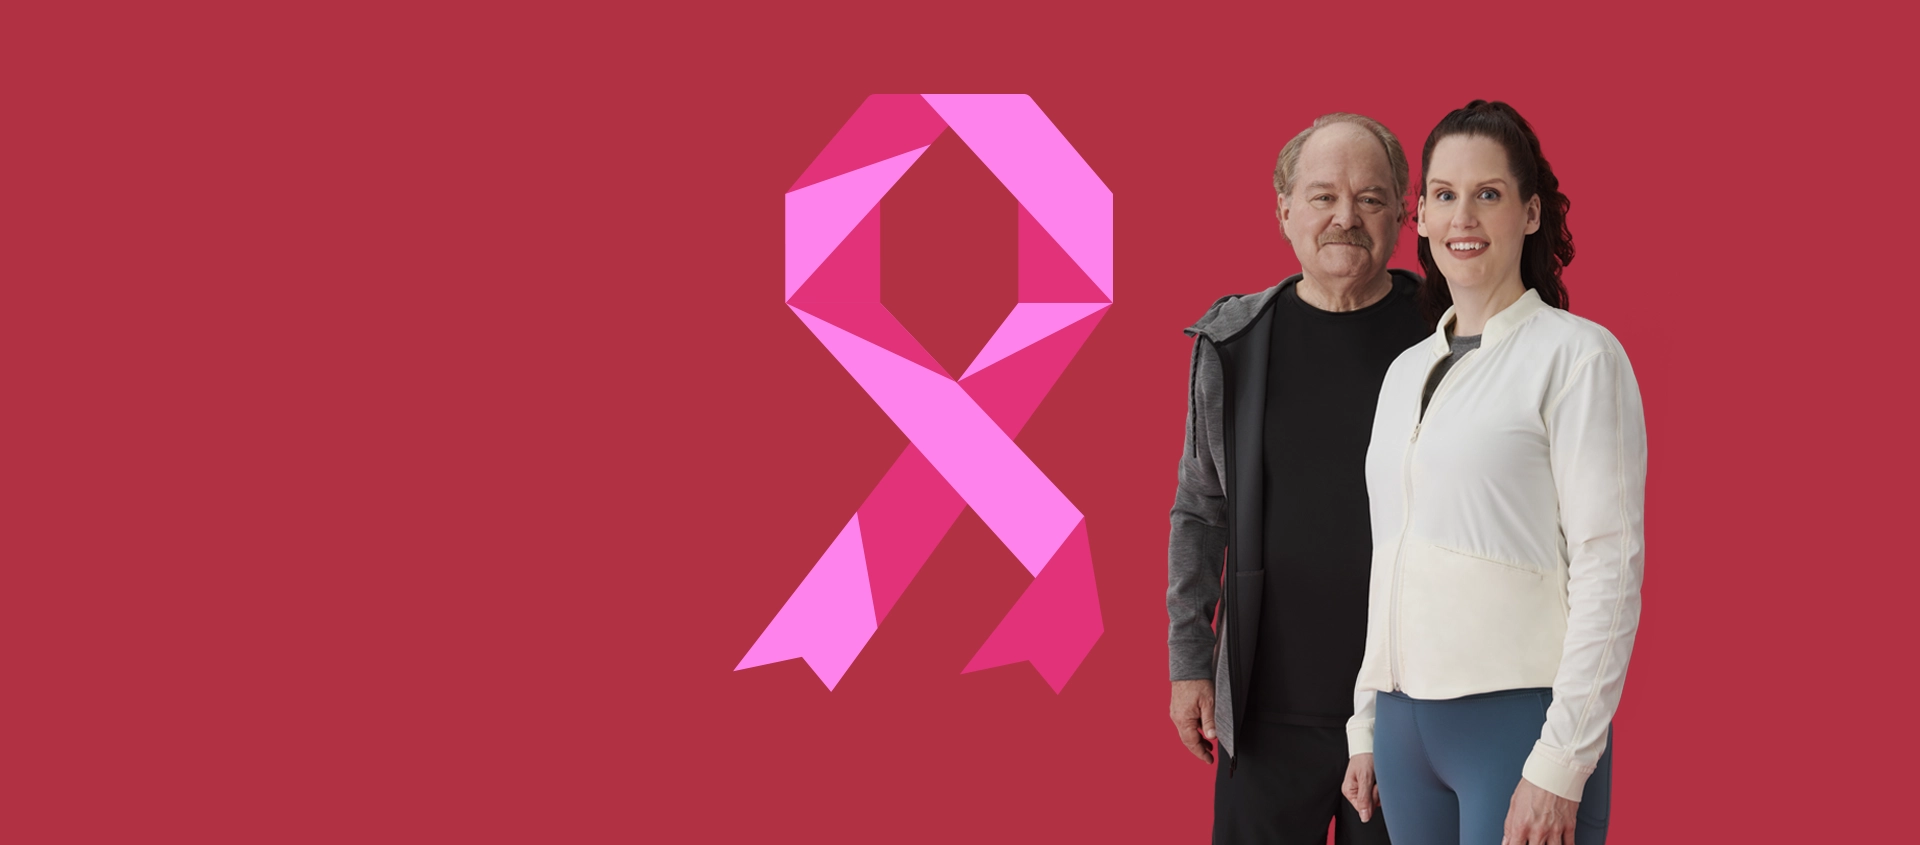 Morgan, a breast cancer survivor, is standing next to her father Len.